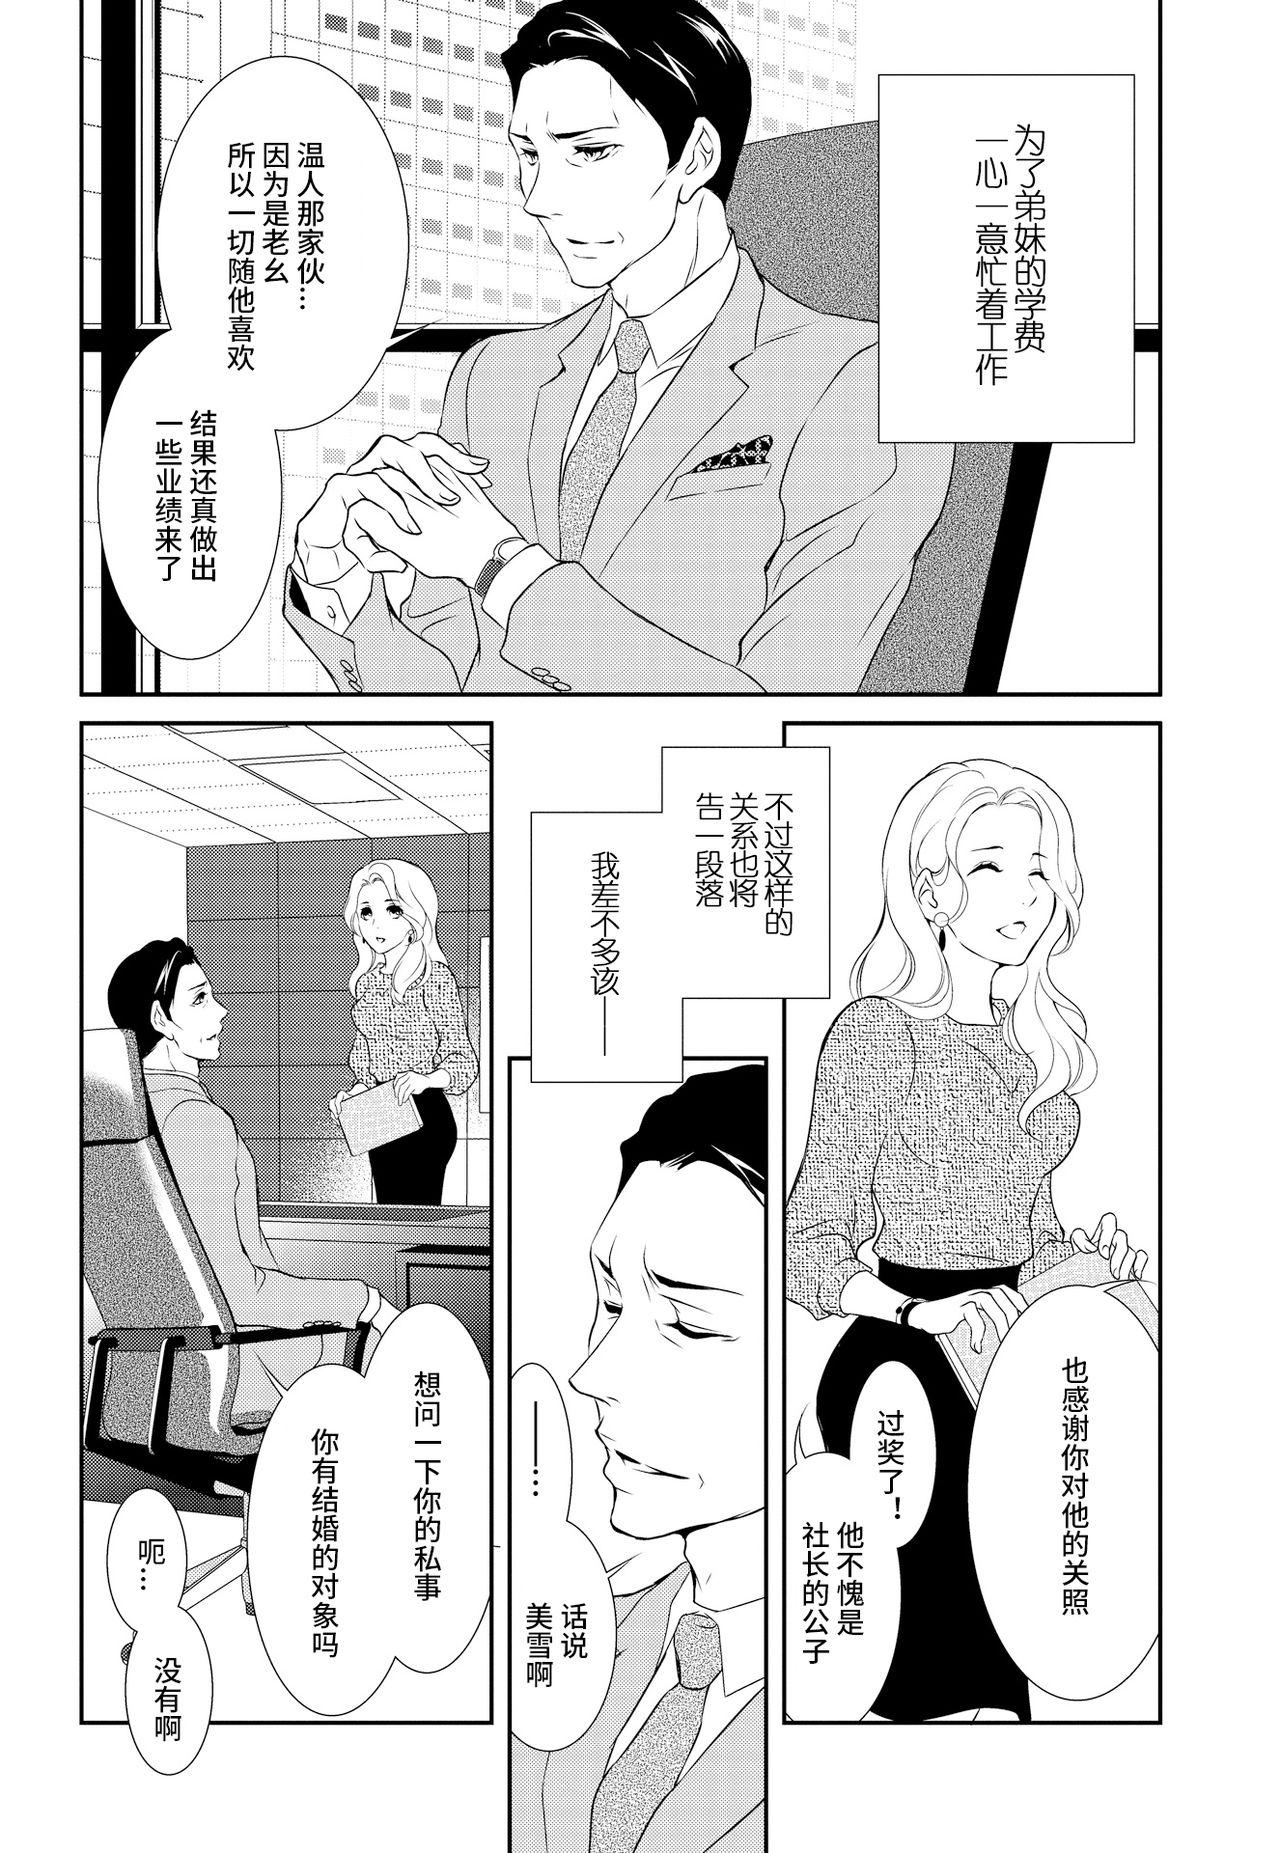 Party Prime Chocolate Boys | 顶级巧克力男子 Ch.3 Deepthroat - Page 10